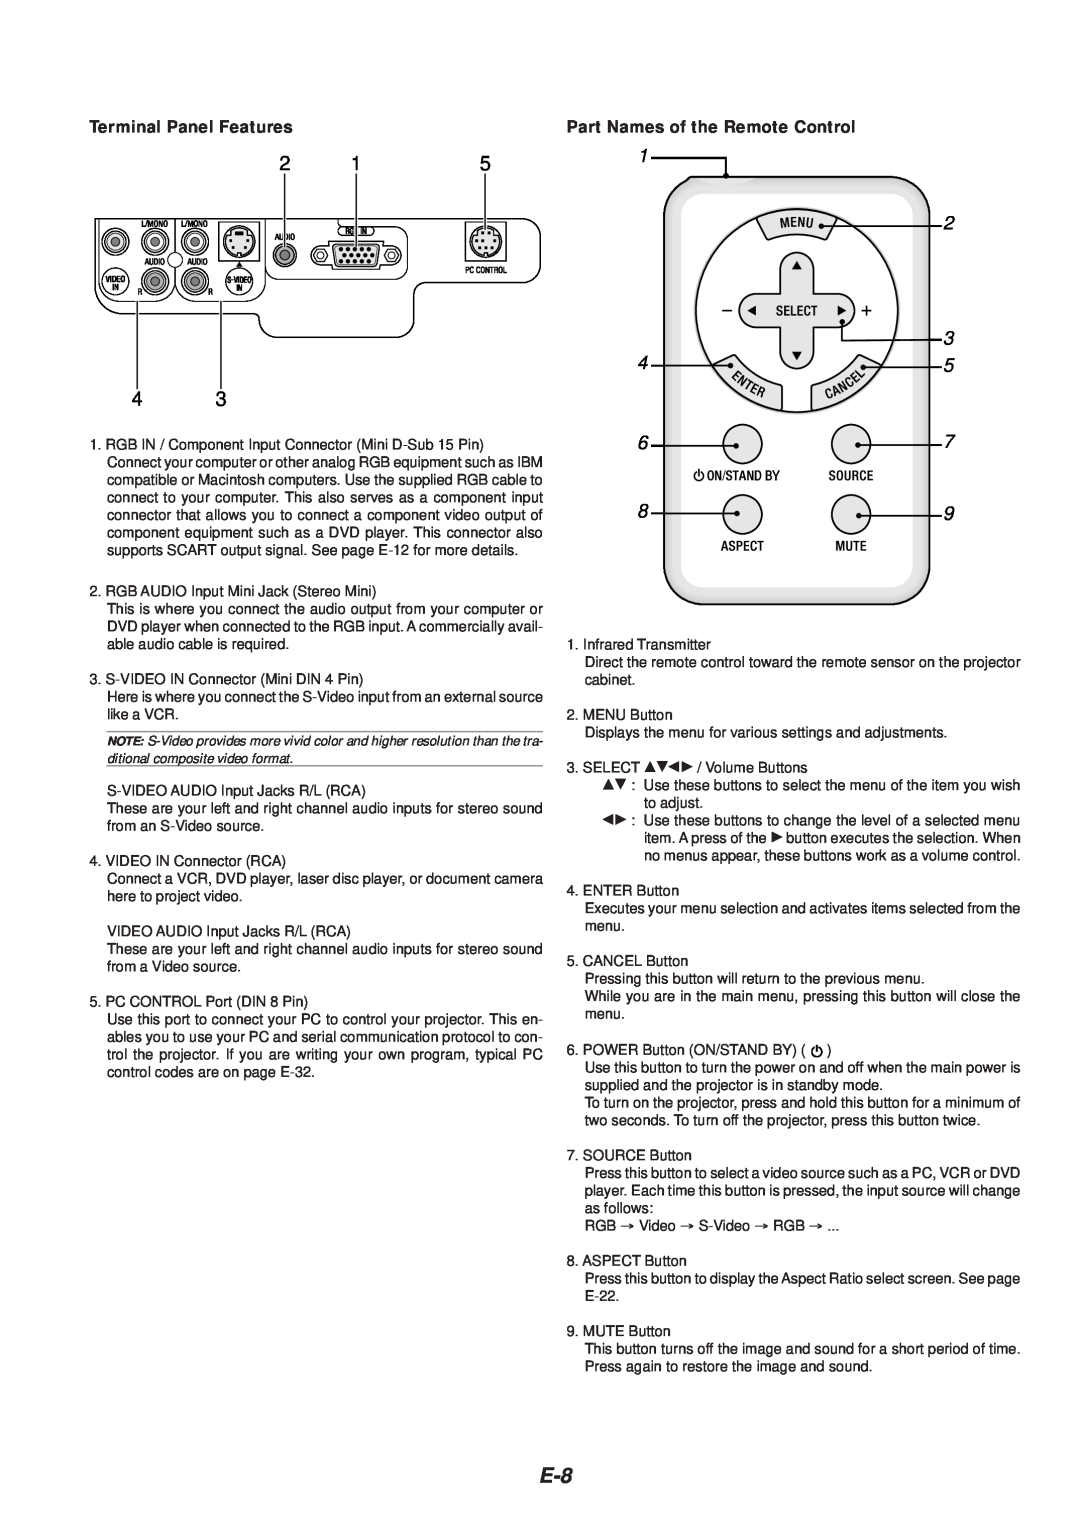 NEC VT46 user manual Terminal Panel Features, Part Names of the Remote Control 